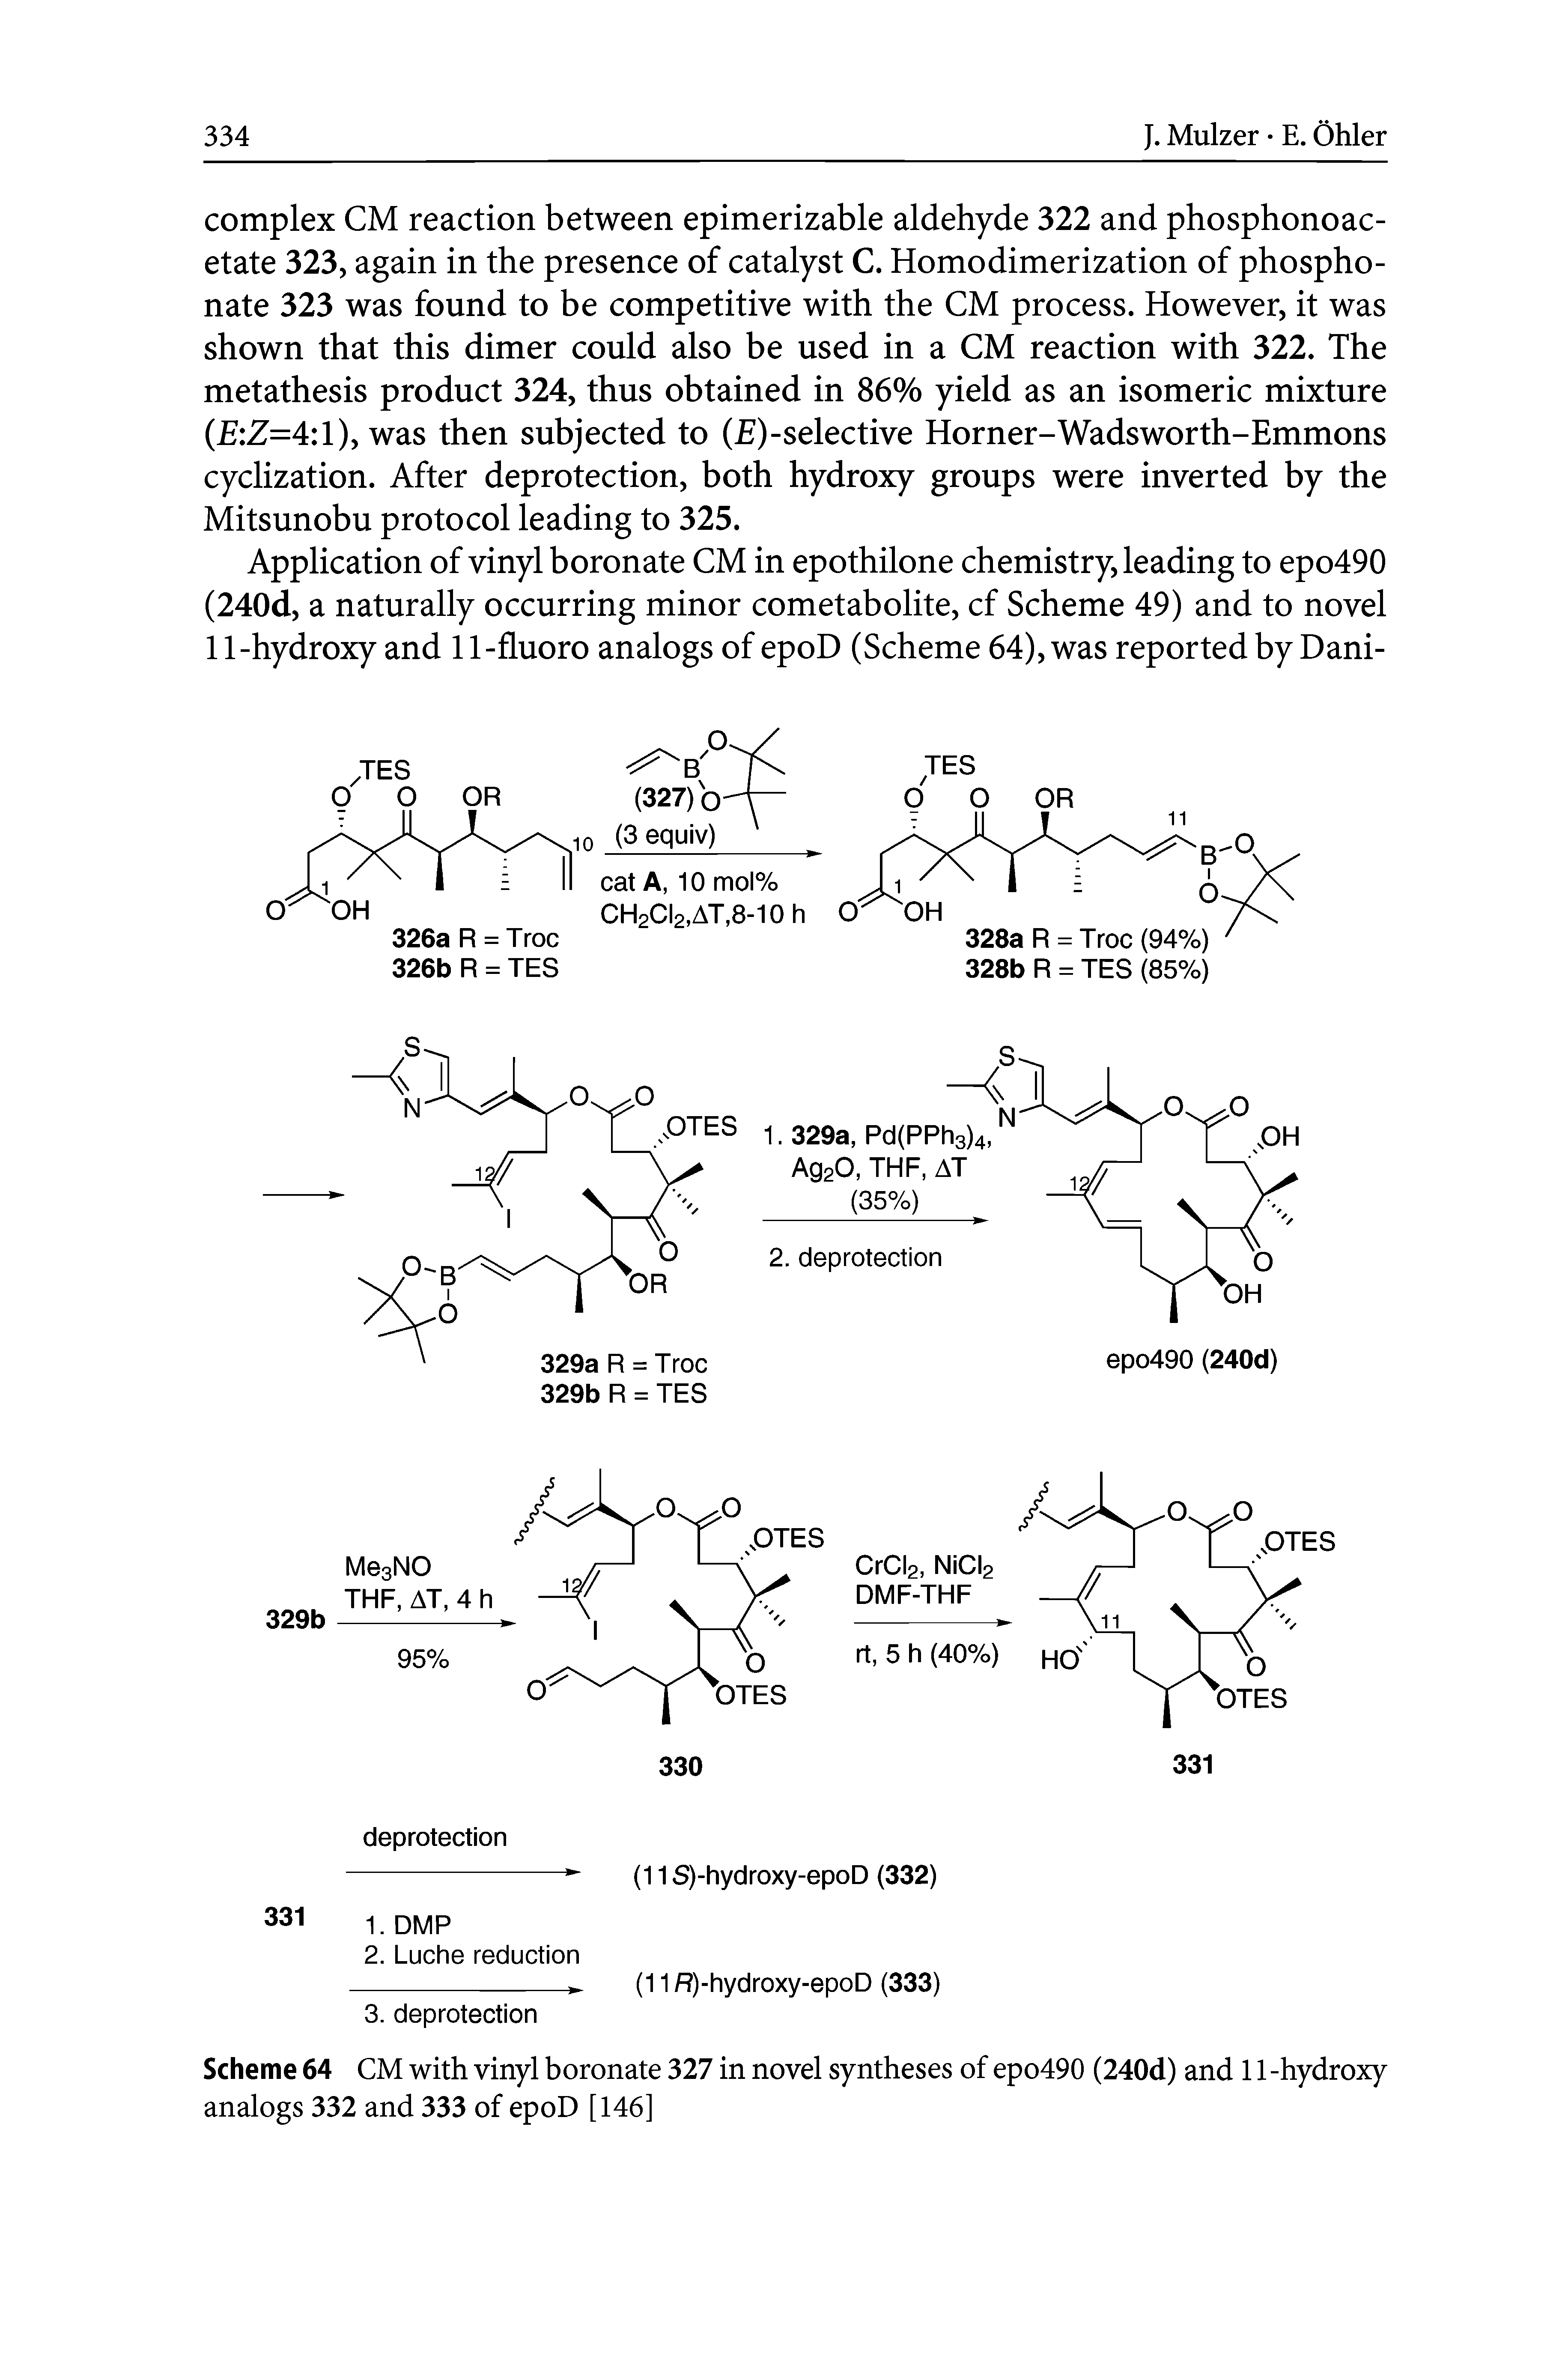 Scheme 64 CM with vinyl boronate 327 in novel syntheses of epo490 (240d) and 11 -hydroxy analogs 332 and 333 of epoD [146]...